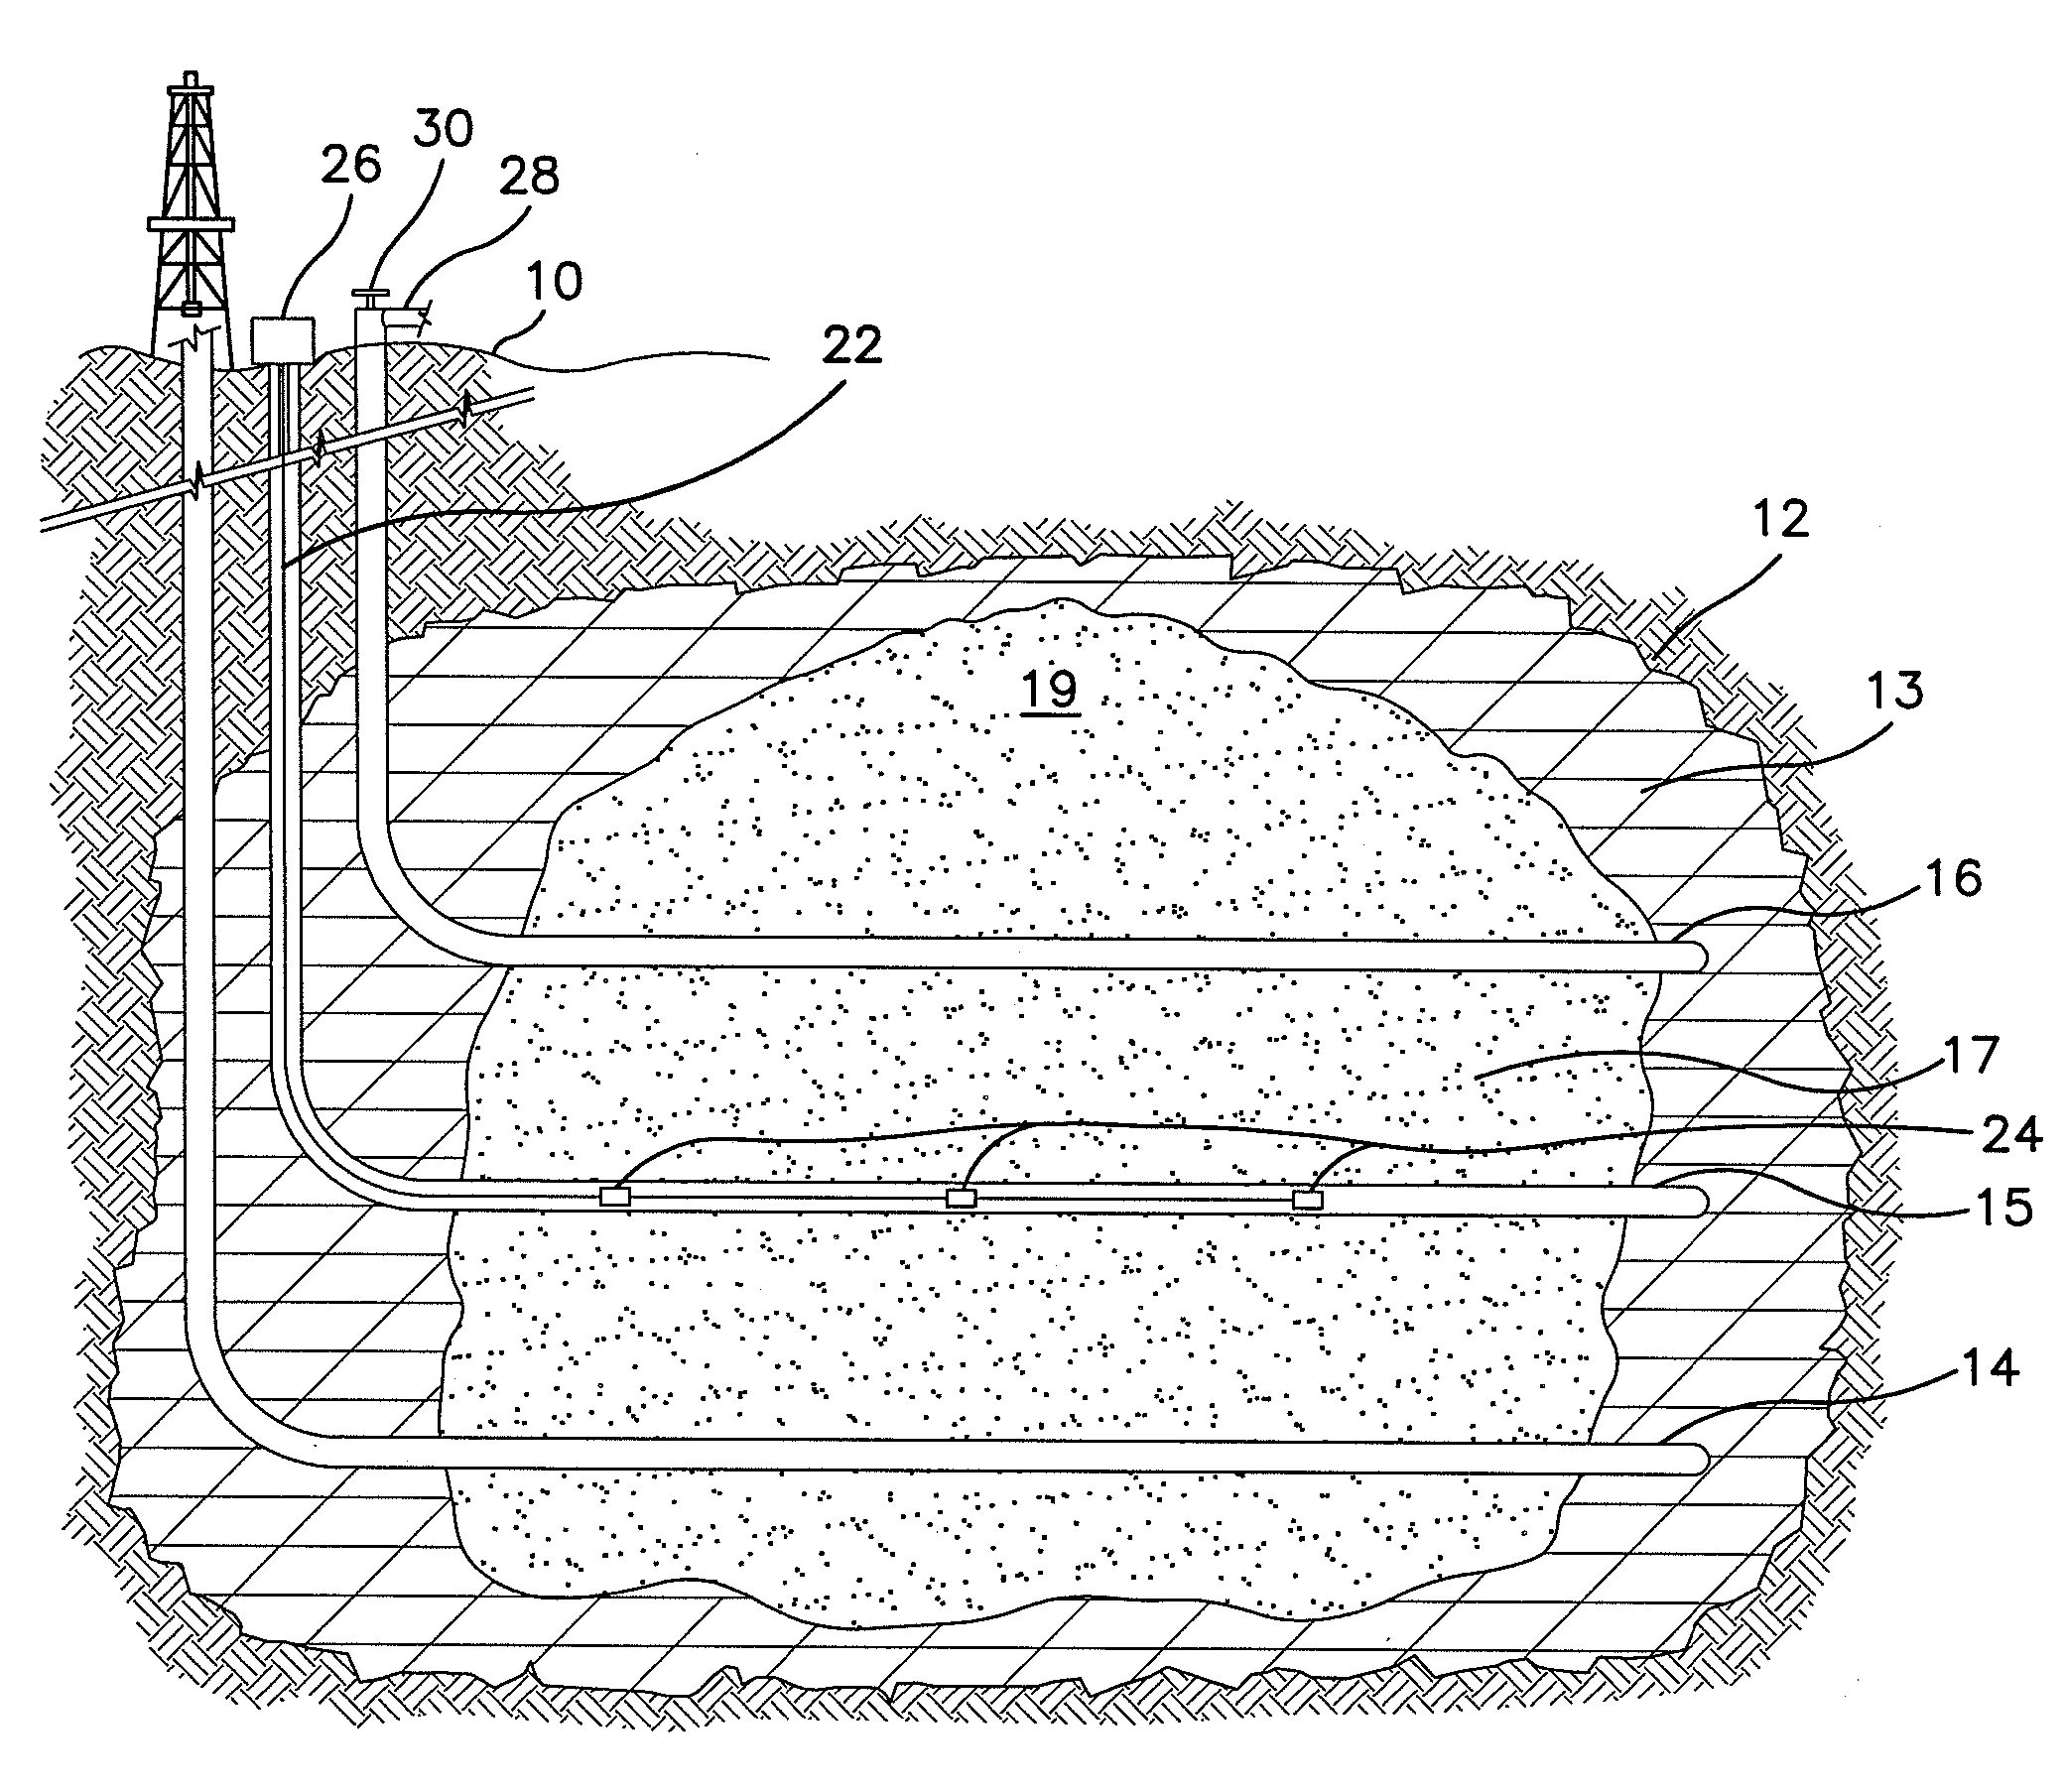 Process for enhanced production of heavy oil using microwaves